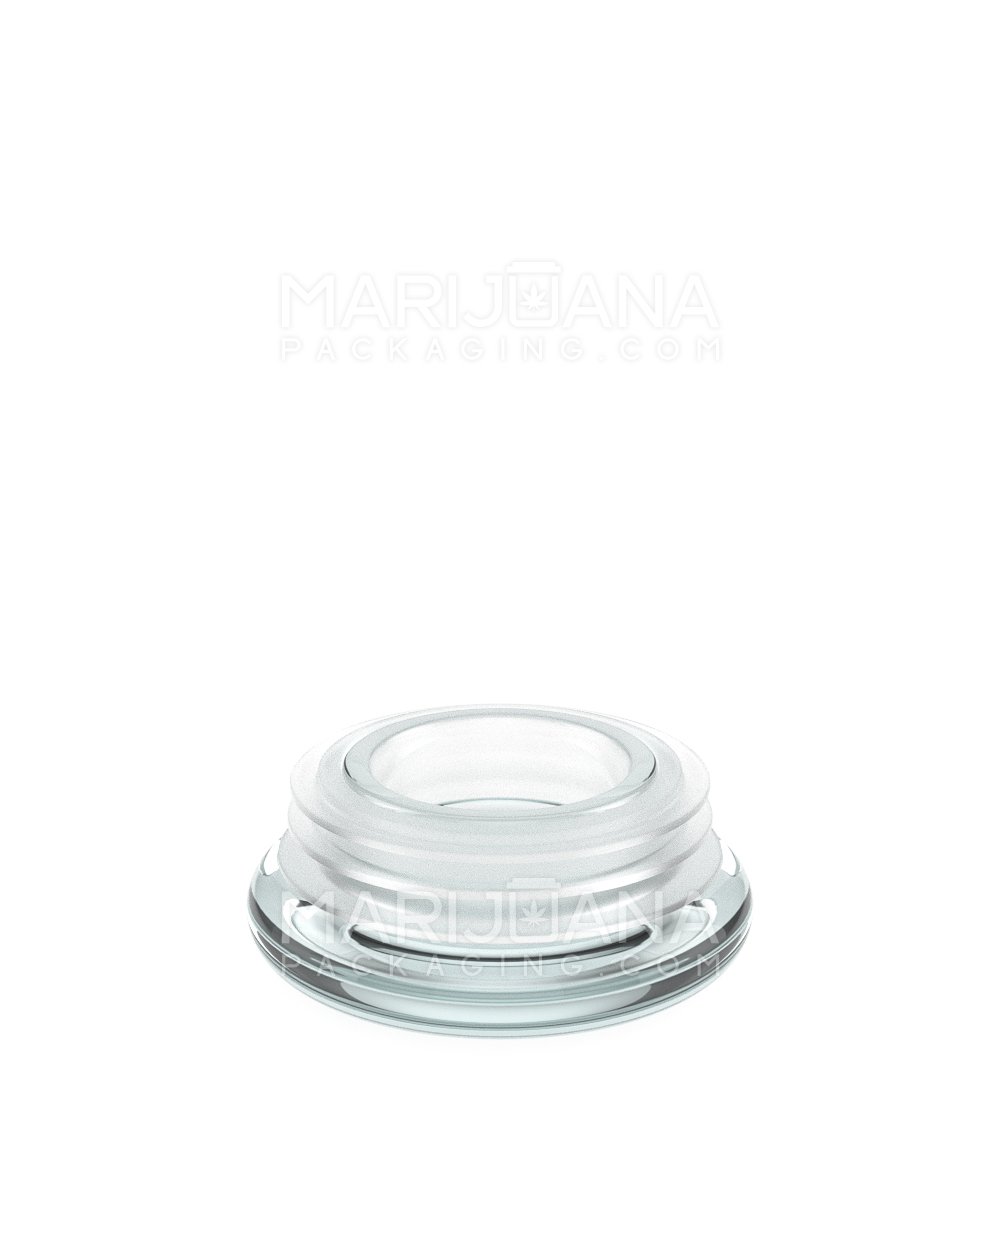 Straight Sided Clear Glass Jar with Lid | 2oz - Clear Glass - 64 Count - 10